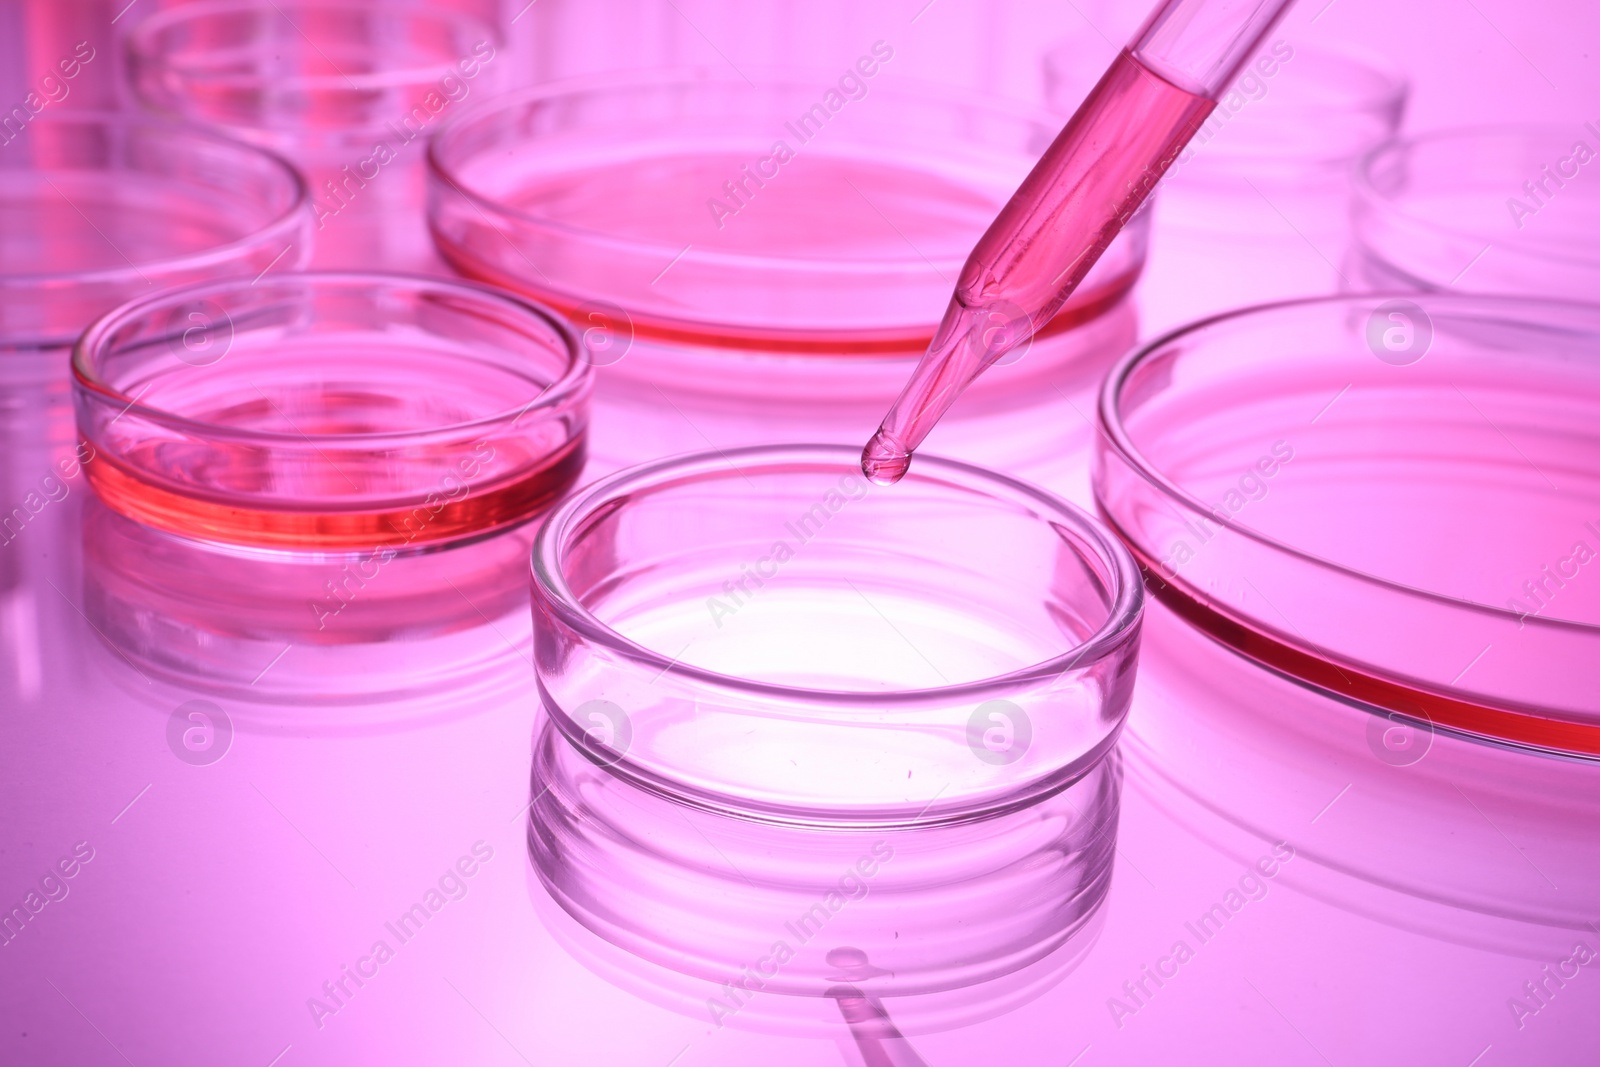 Photo of Dripping reagent into Petri dish with sample on table, toned in pink